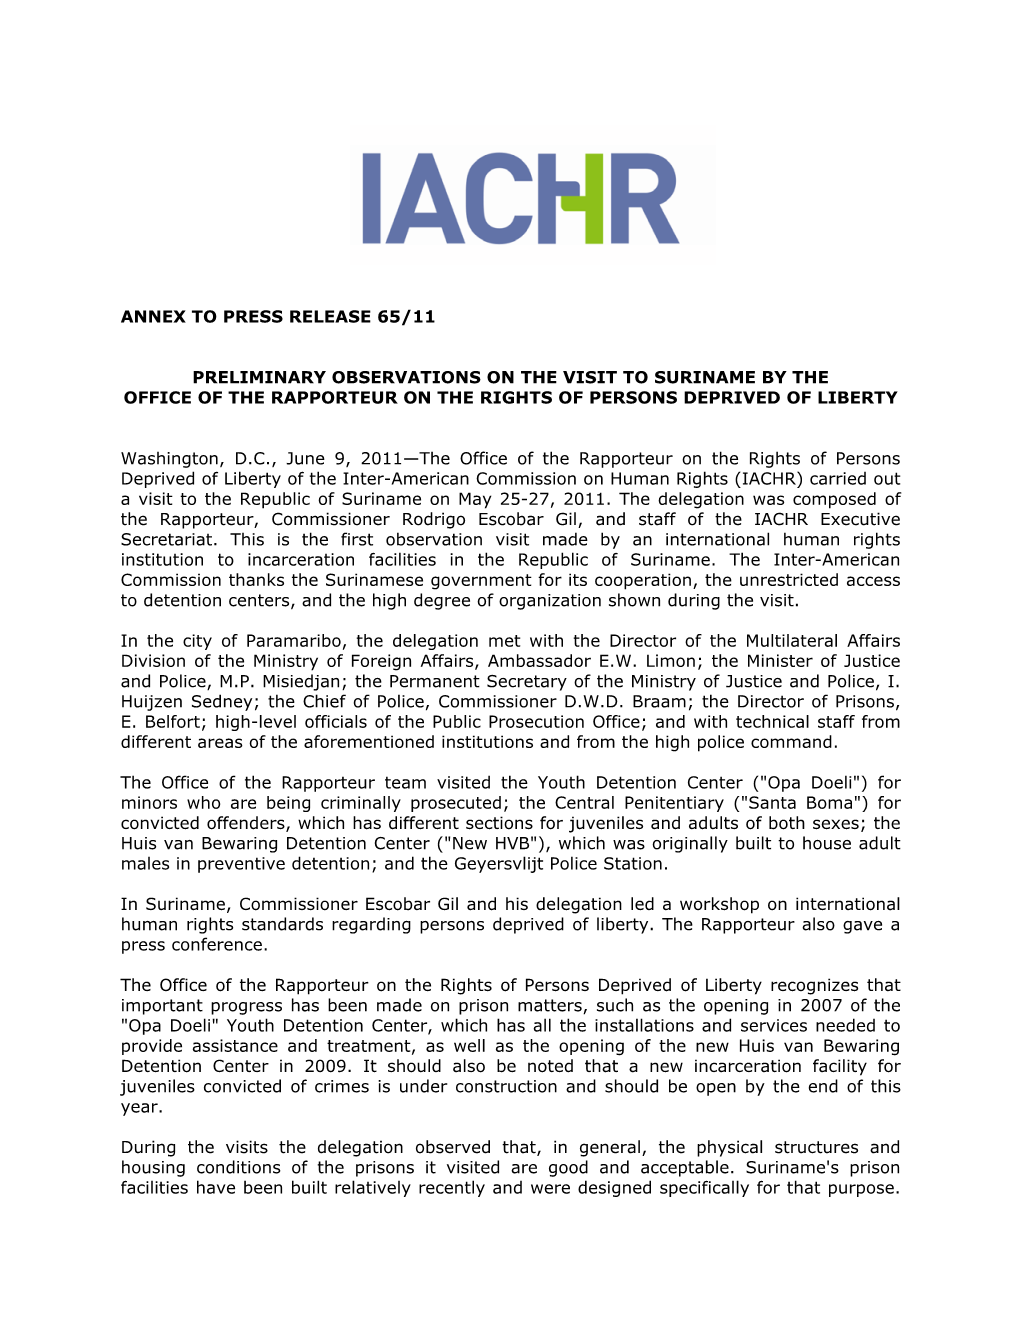 Office of the Rapporteur on the Rights of Persons Deprived of Liberty